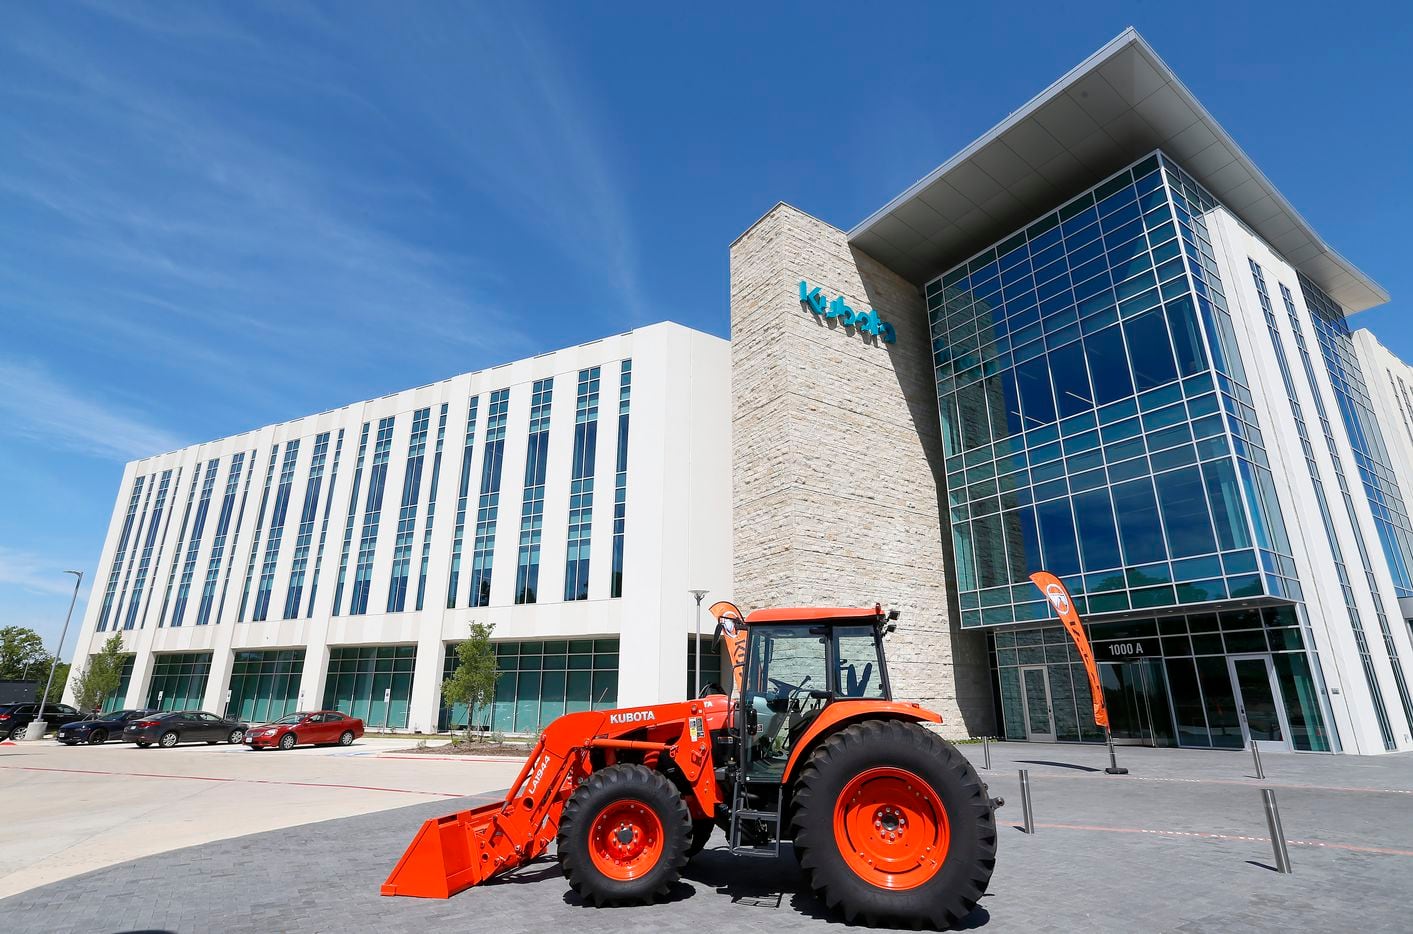 Exterior shot of the new Kubota Tractor Corp. headquarters in Grapevine.